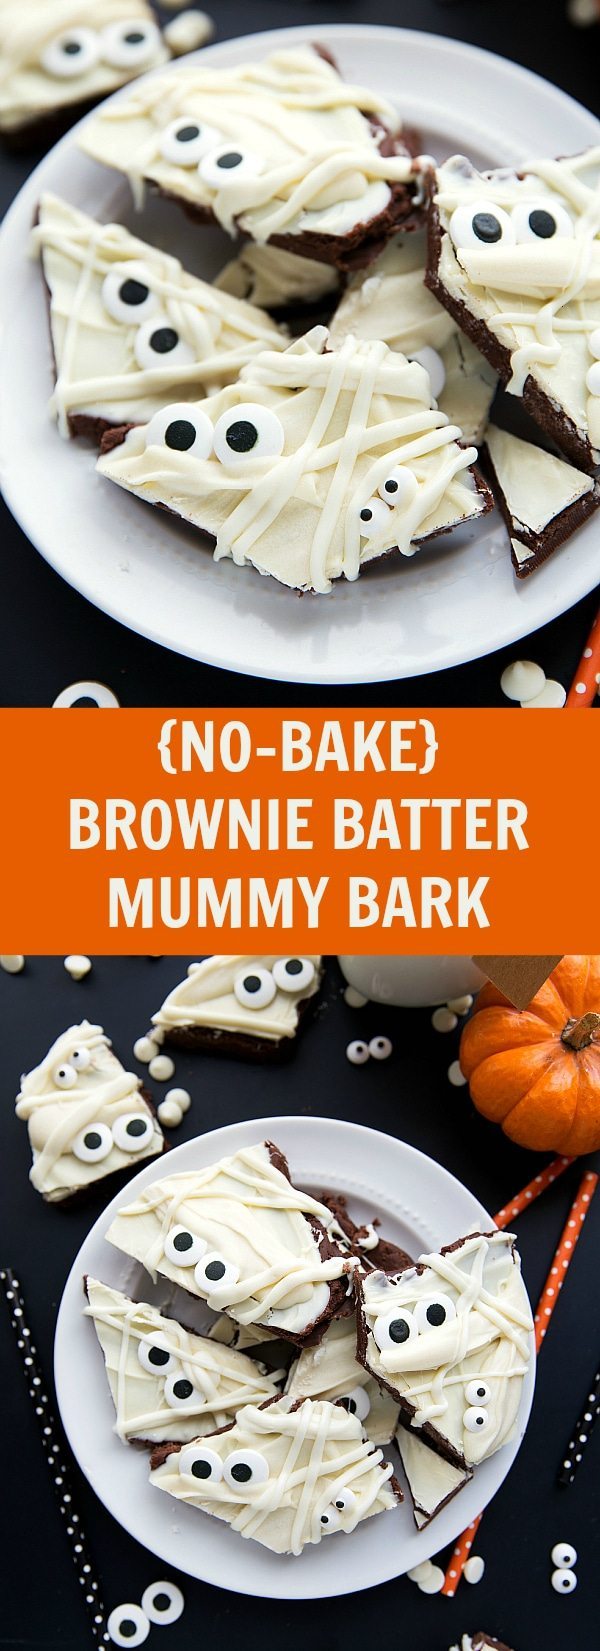 Great Halloween Treat - only 5 ingredients and NO baking required! Chocolate Brownie Batter Mummy Bark